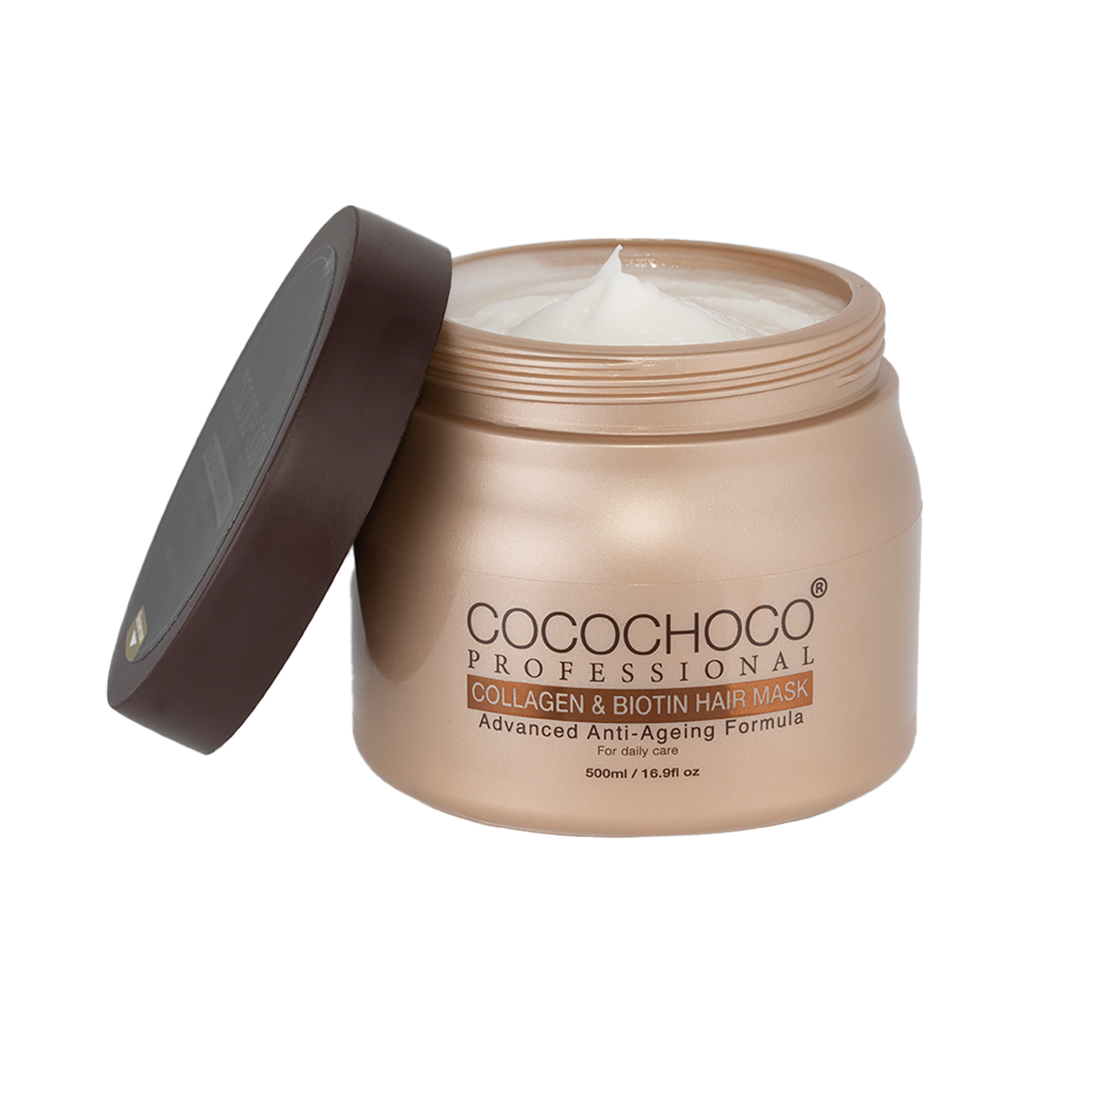 Cocochoco_collagen_biotin_hair_mask__front__open0.png